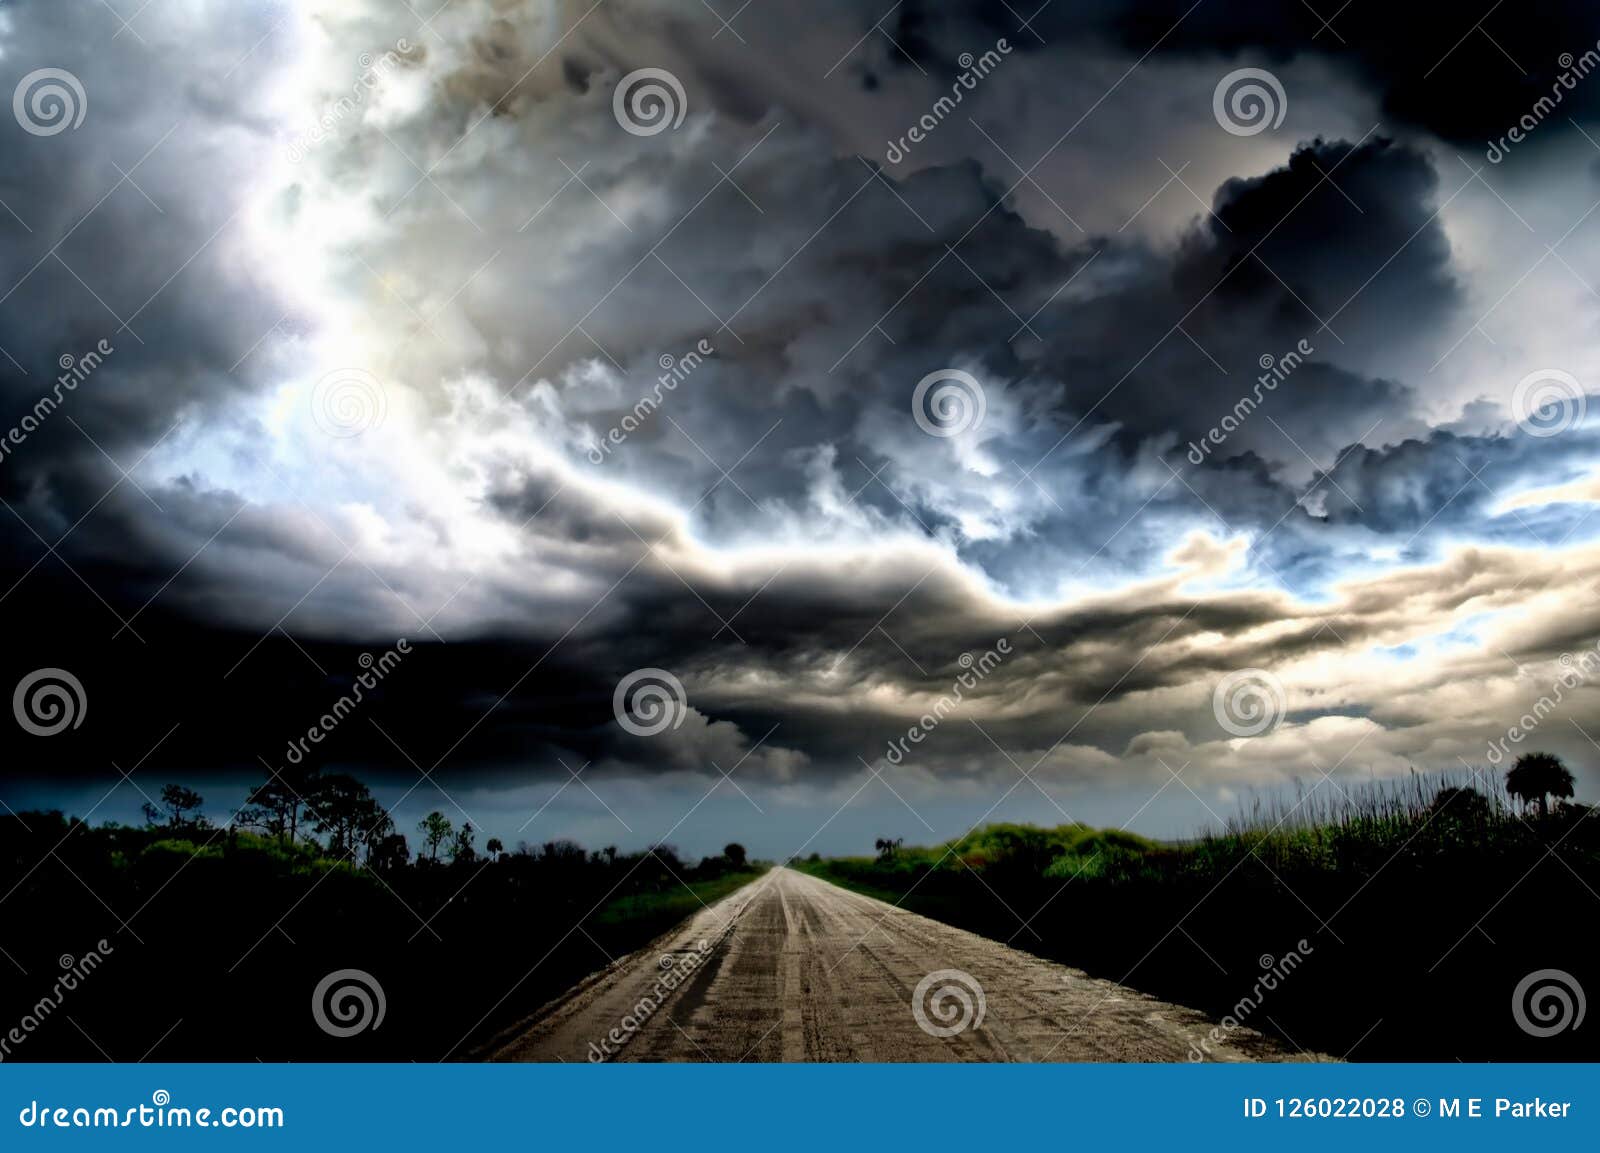 dark thunder clouds and dramatic storms over a rural road.